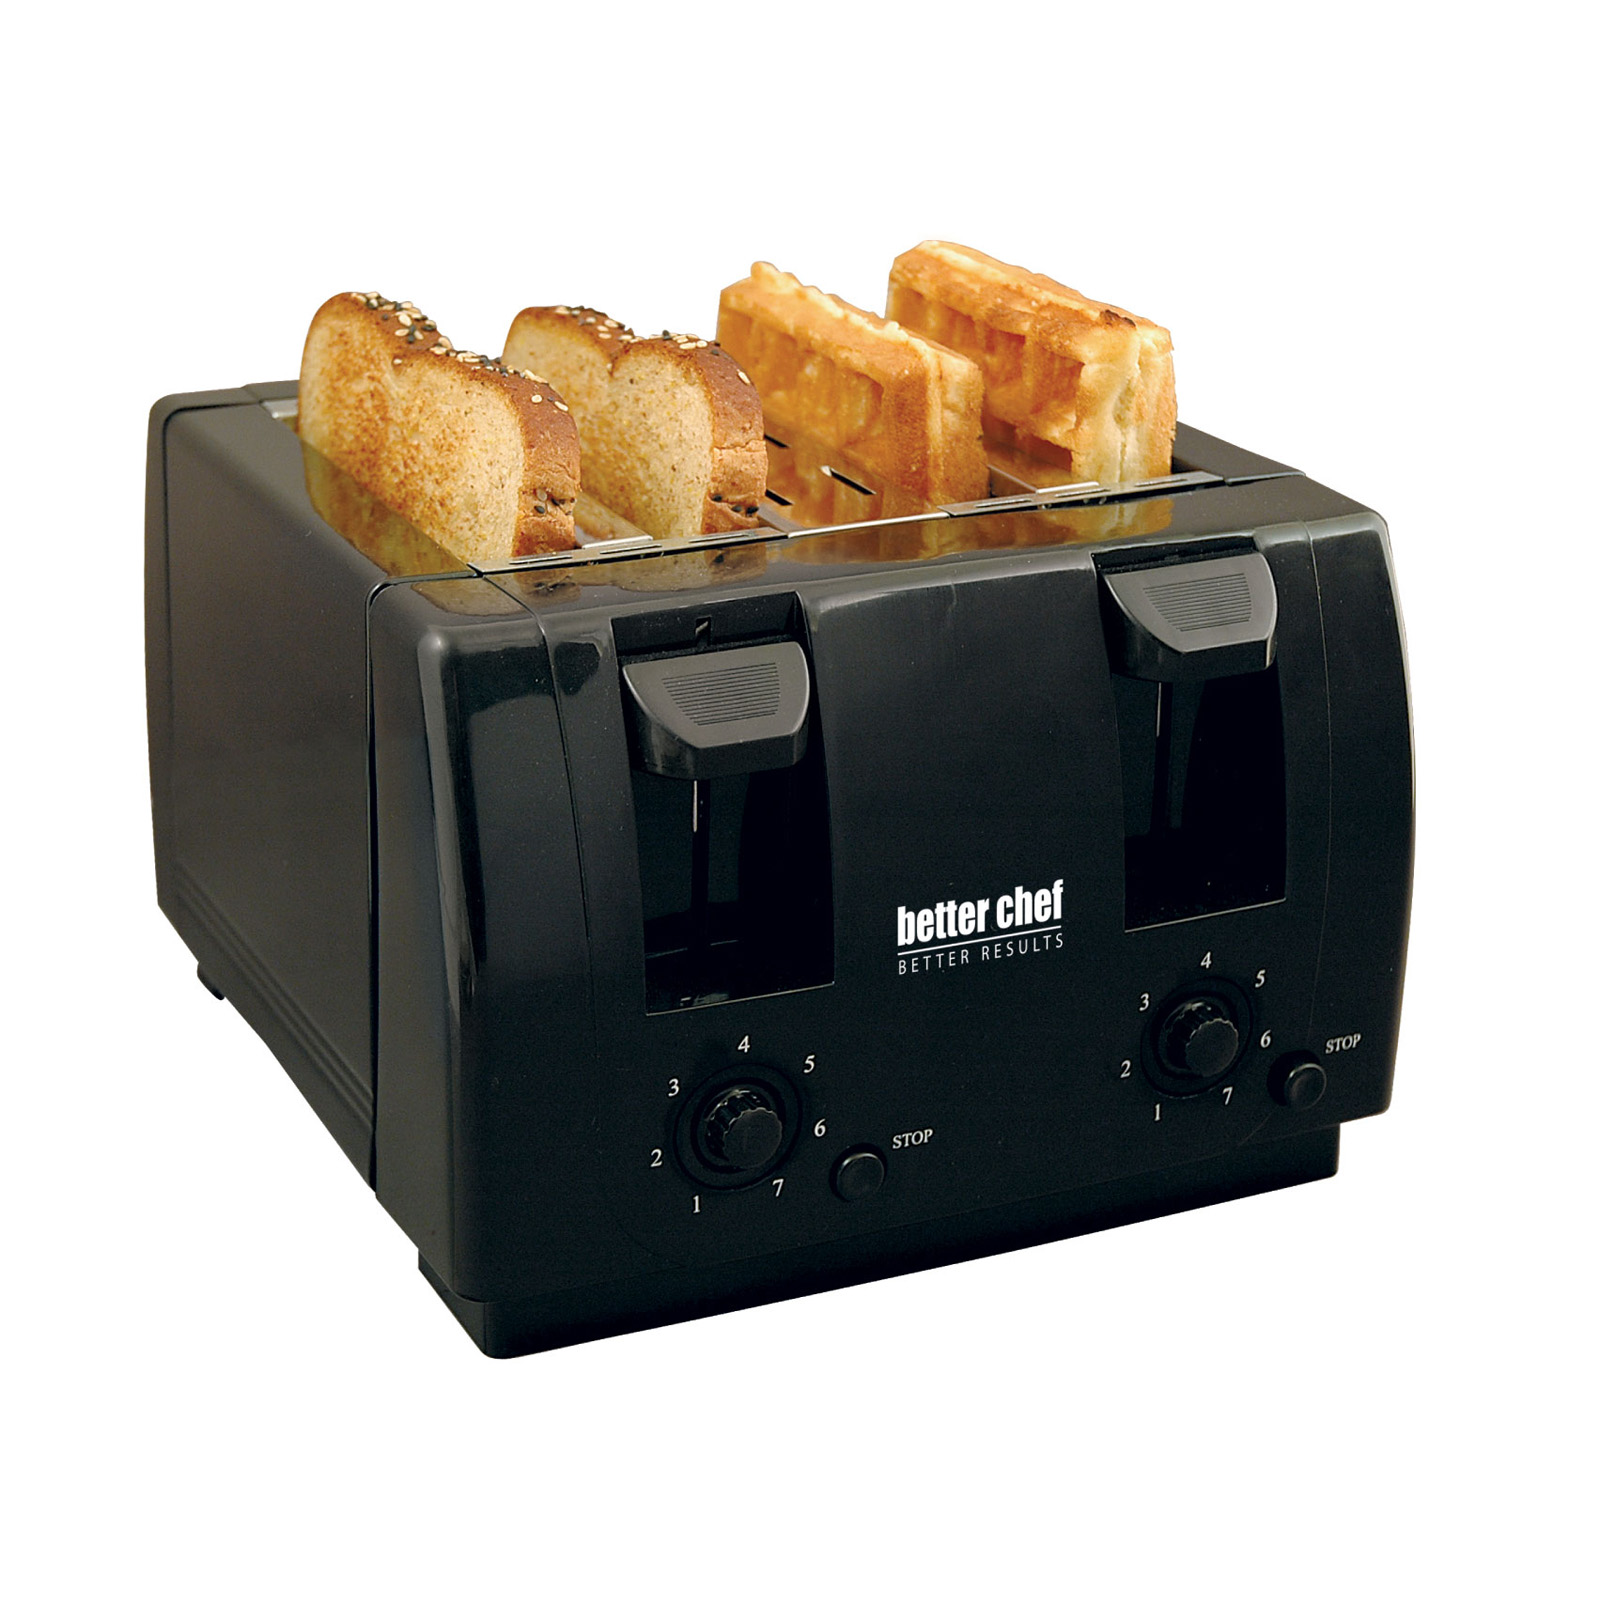 Better Chef 4-Slice Dual Control Toaster - Black